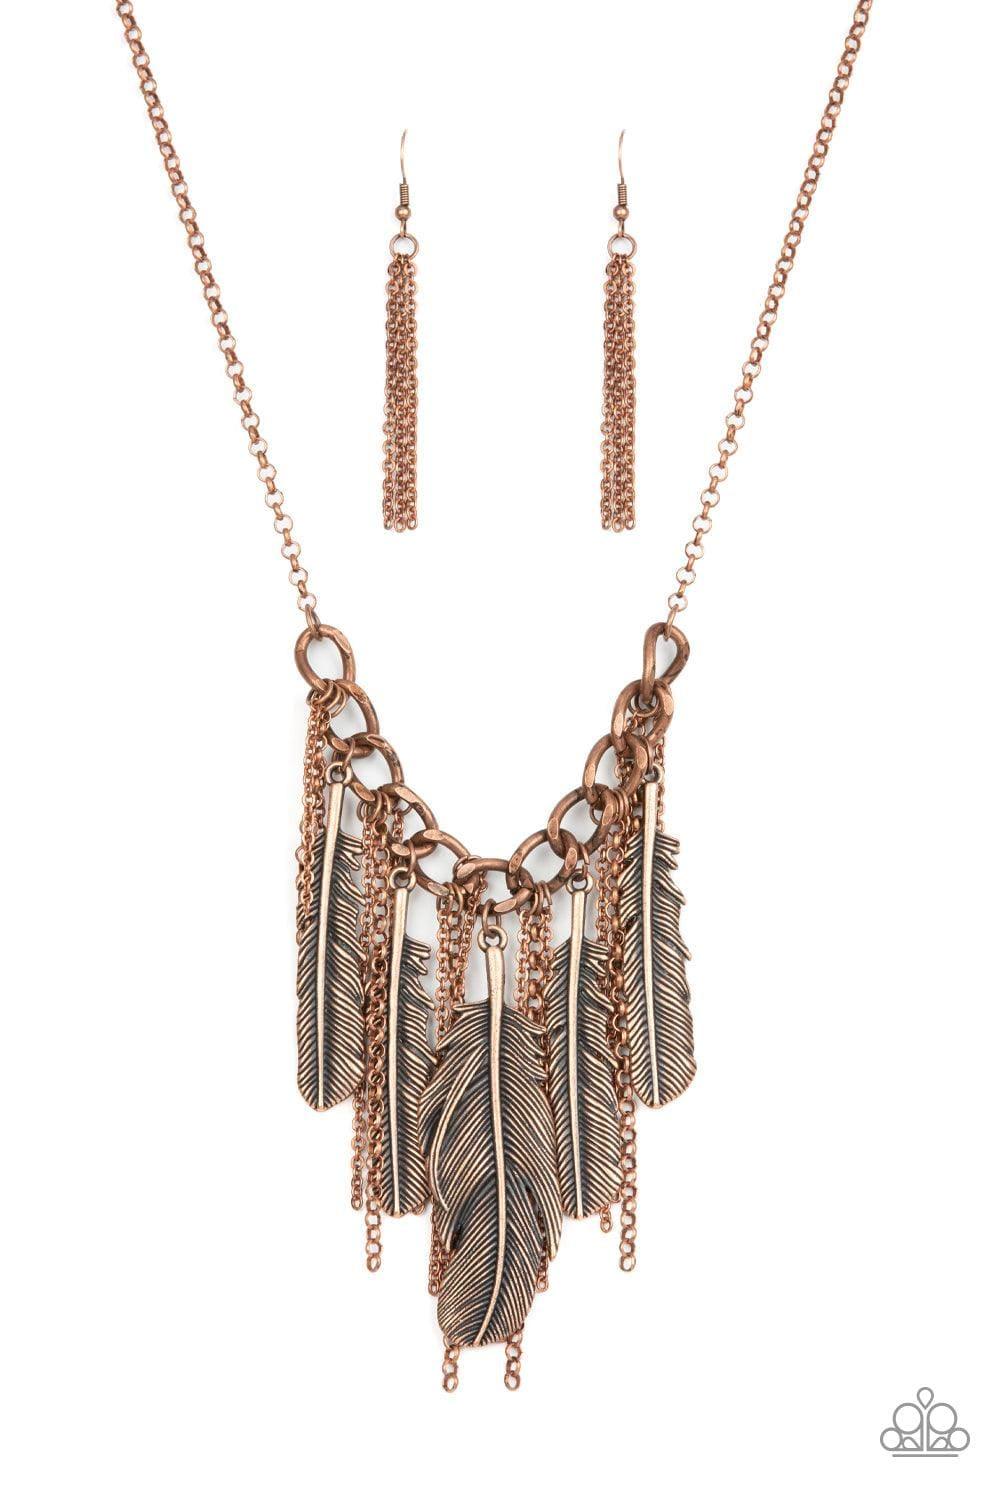 Paparazzi Accessories - Nest Friends Forever - Copper Necklace - Bling by JessieK